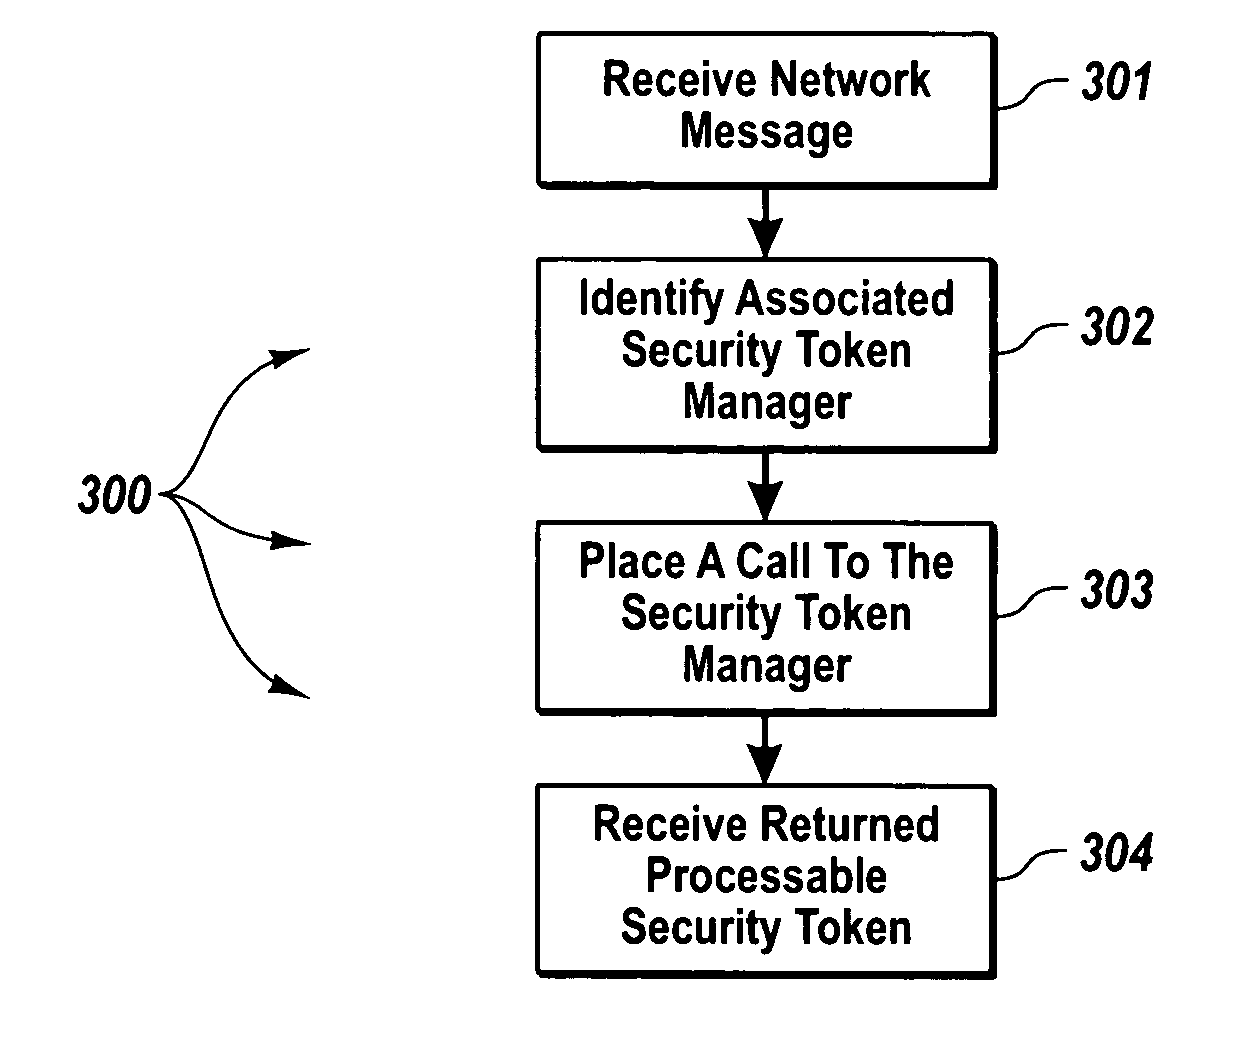 Extendible security token management architecture and secure message handling methods